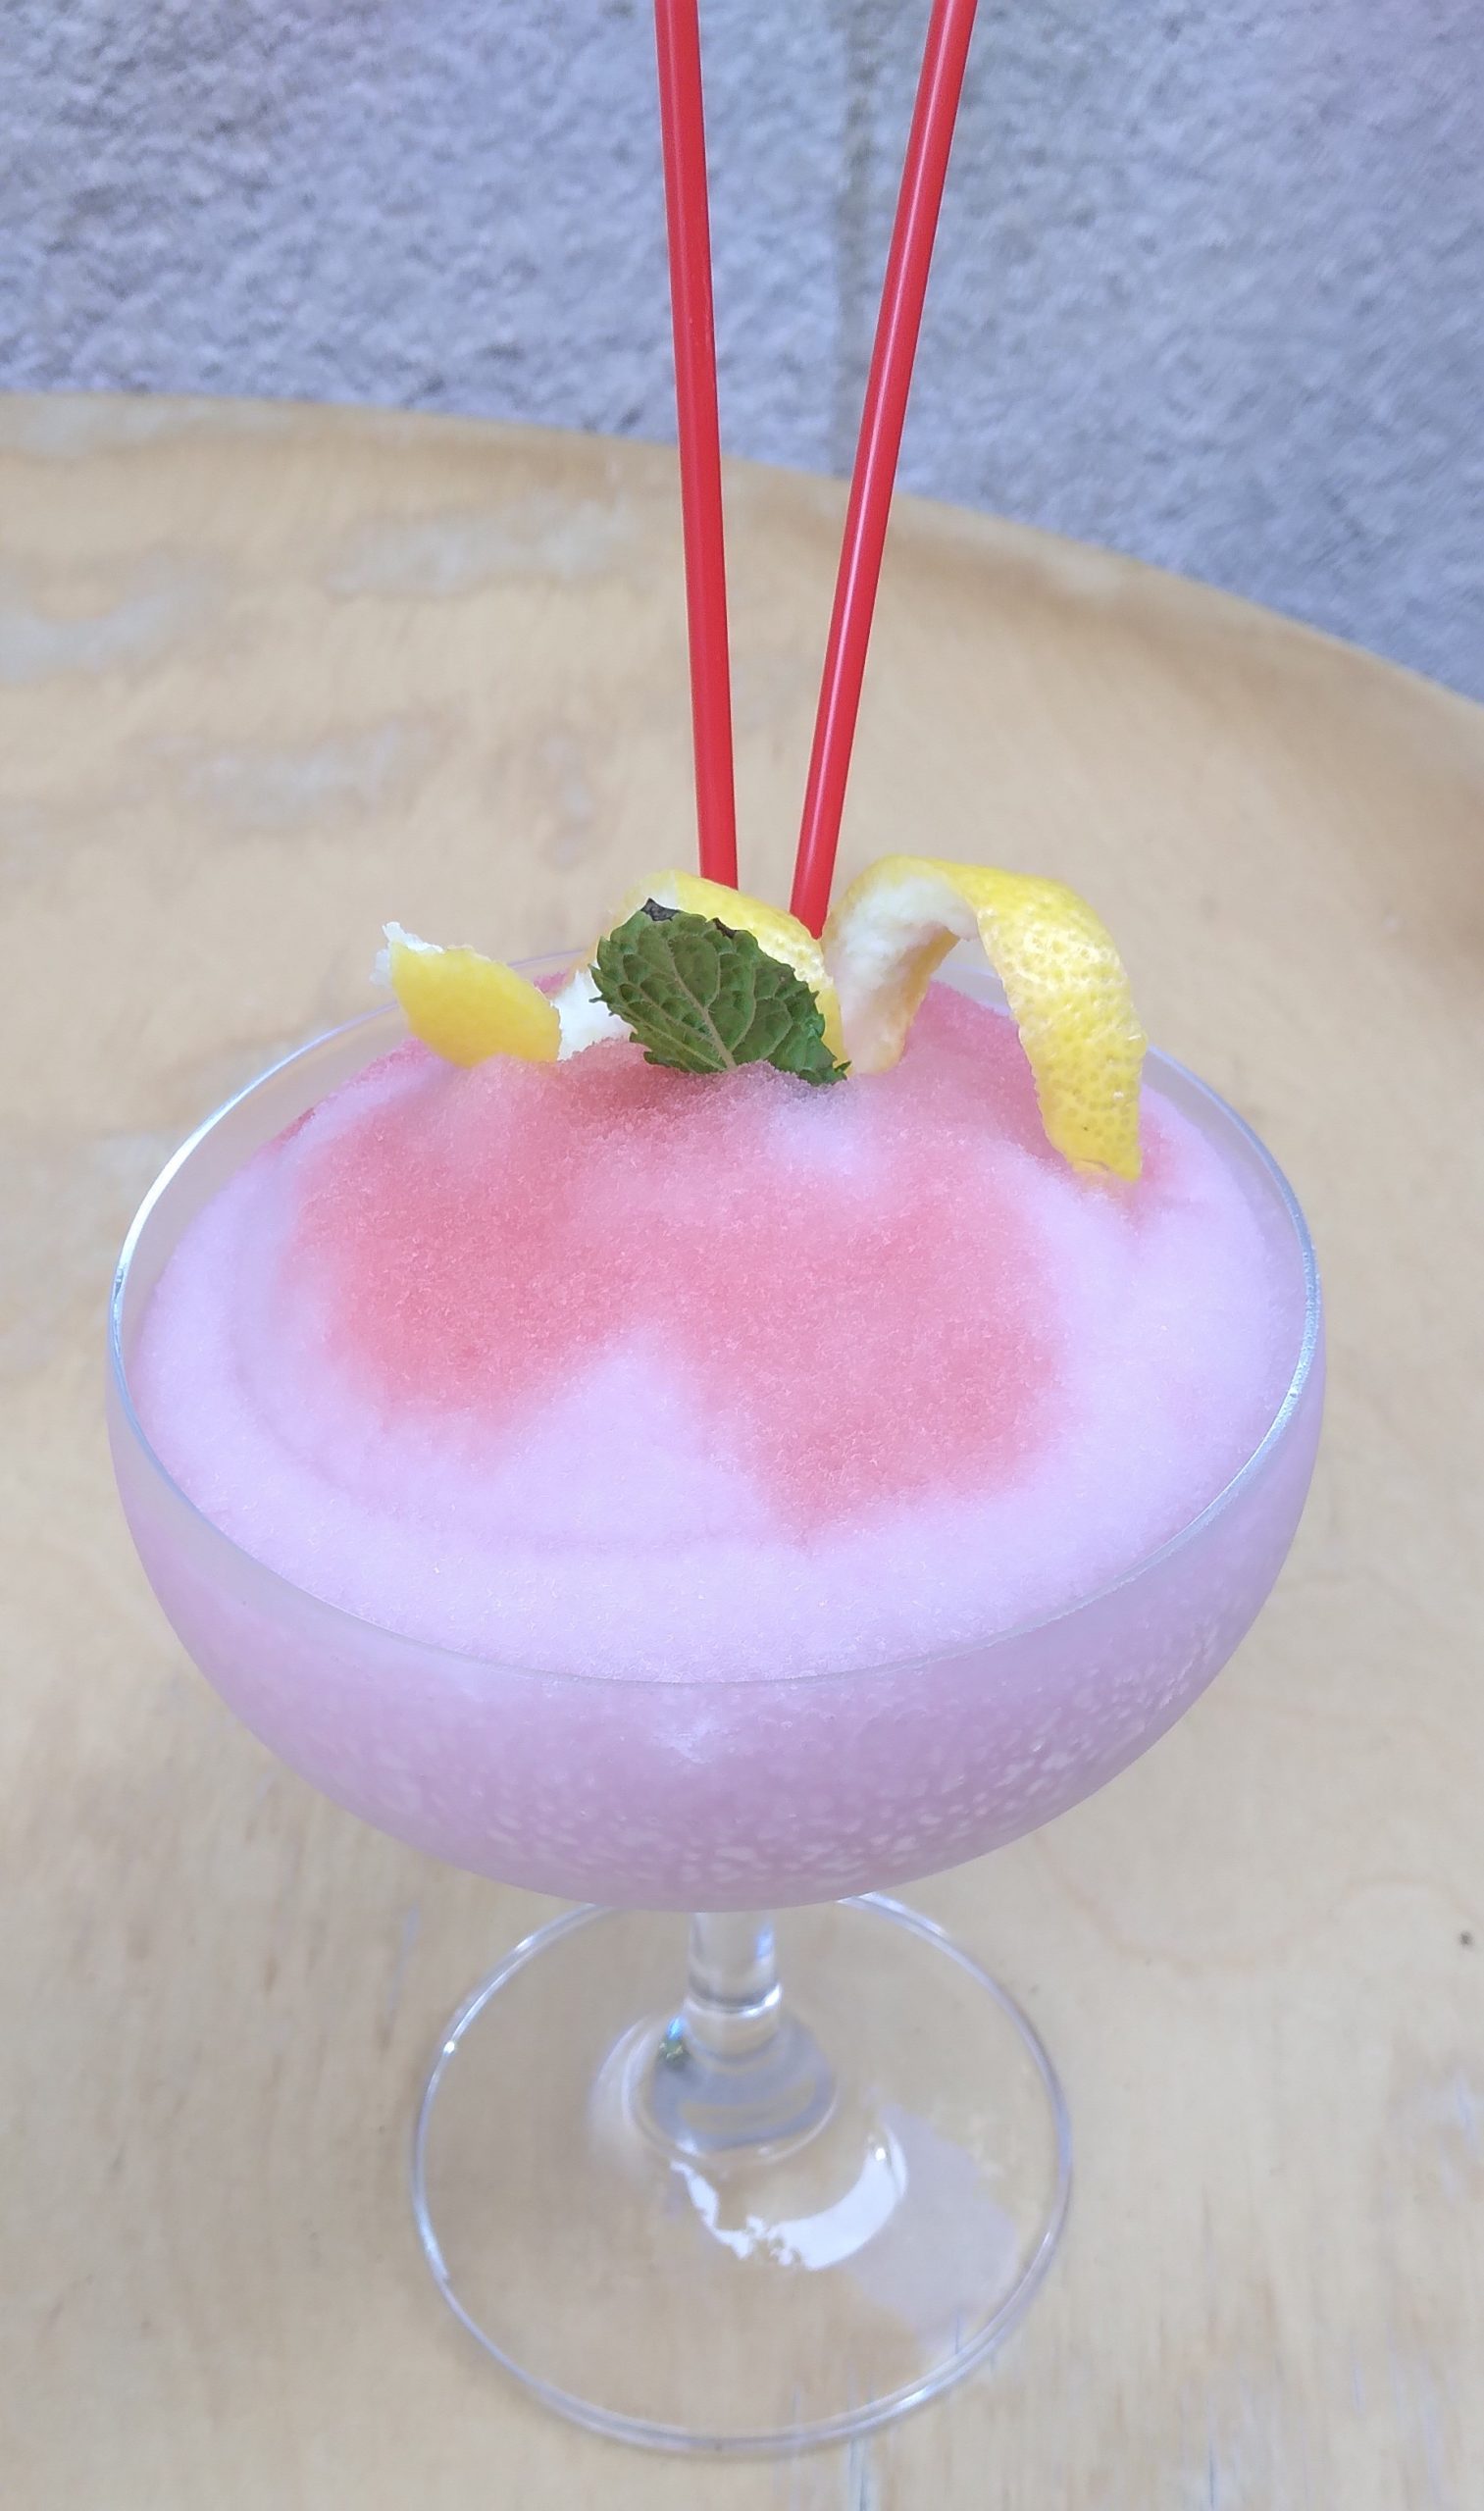 Frozen pink lady from The Wine Smith